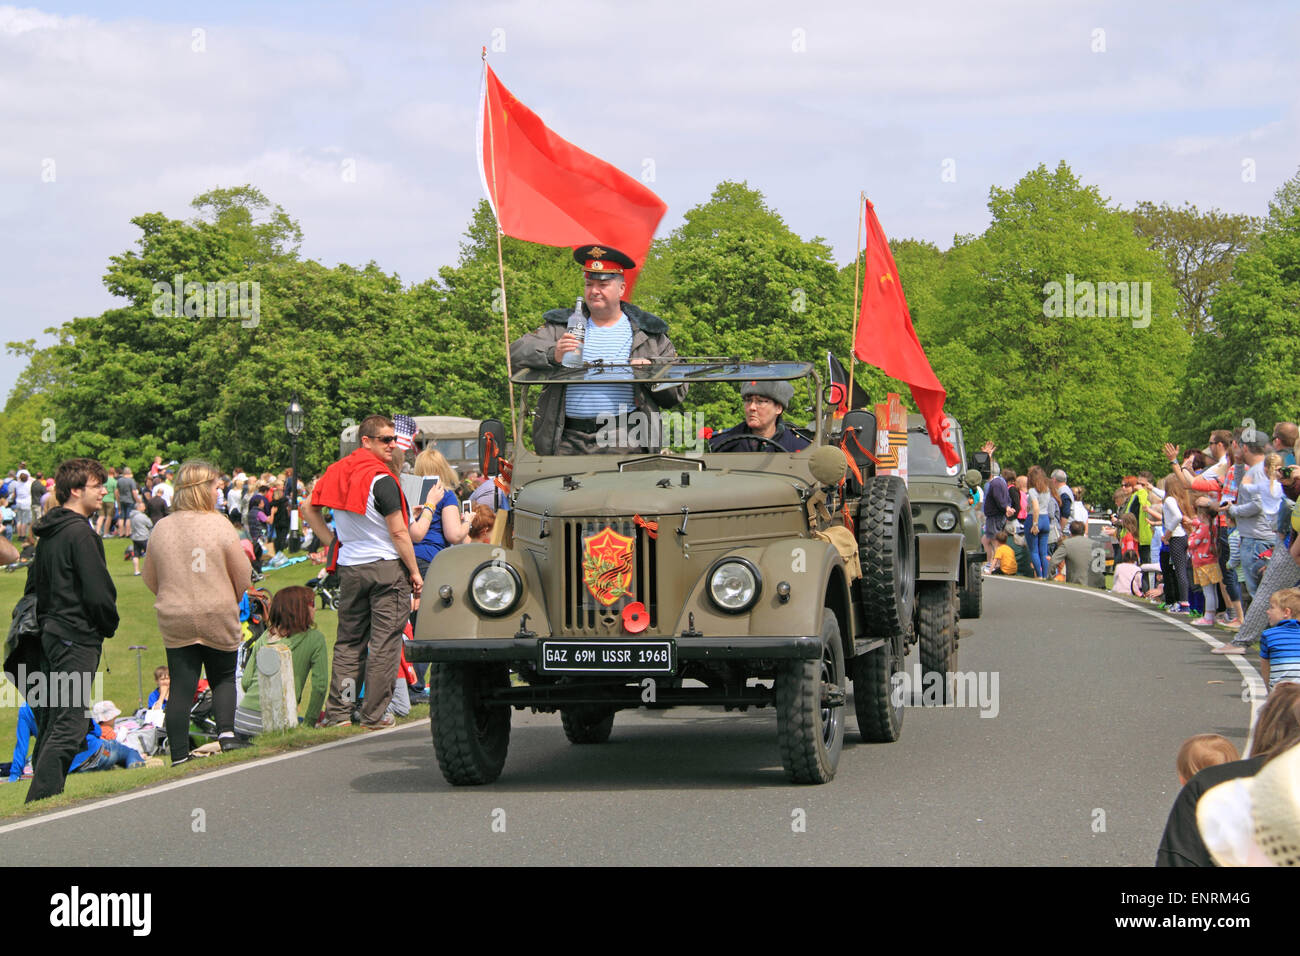 Russian GAZ-69 light truck (1968), Chestnut Sunday, 10th May 2015. Bushy Park, Hampton Court, London Borough of Richmond, England, Great Britain, United Kingdom, UK, Europe. Vintage and classic vehicle parade and displays with fairground attractions and military reenactments. Credit:  Ian Bottle / Alamy Live News Stock Photo